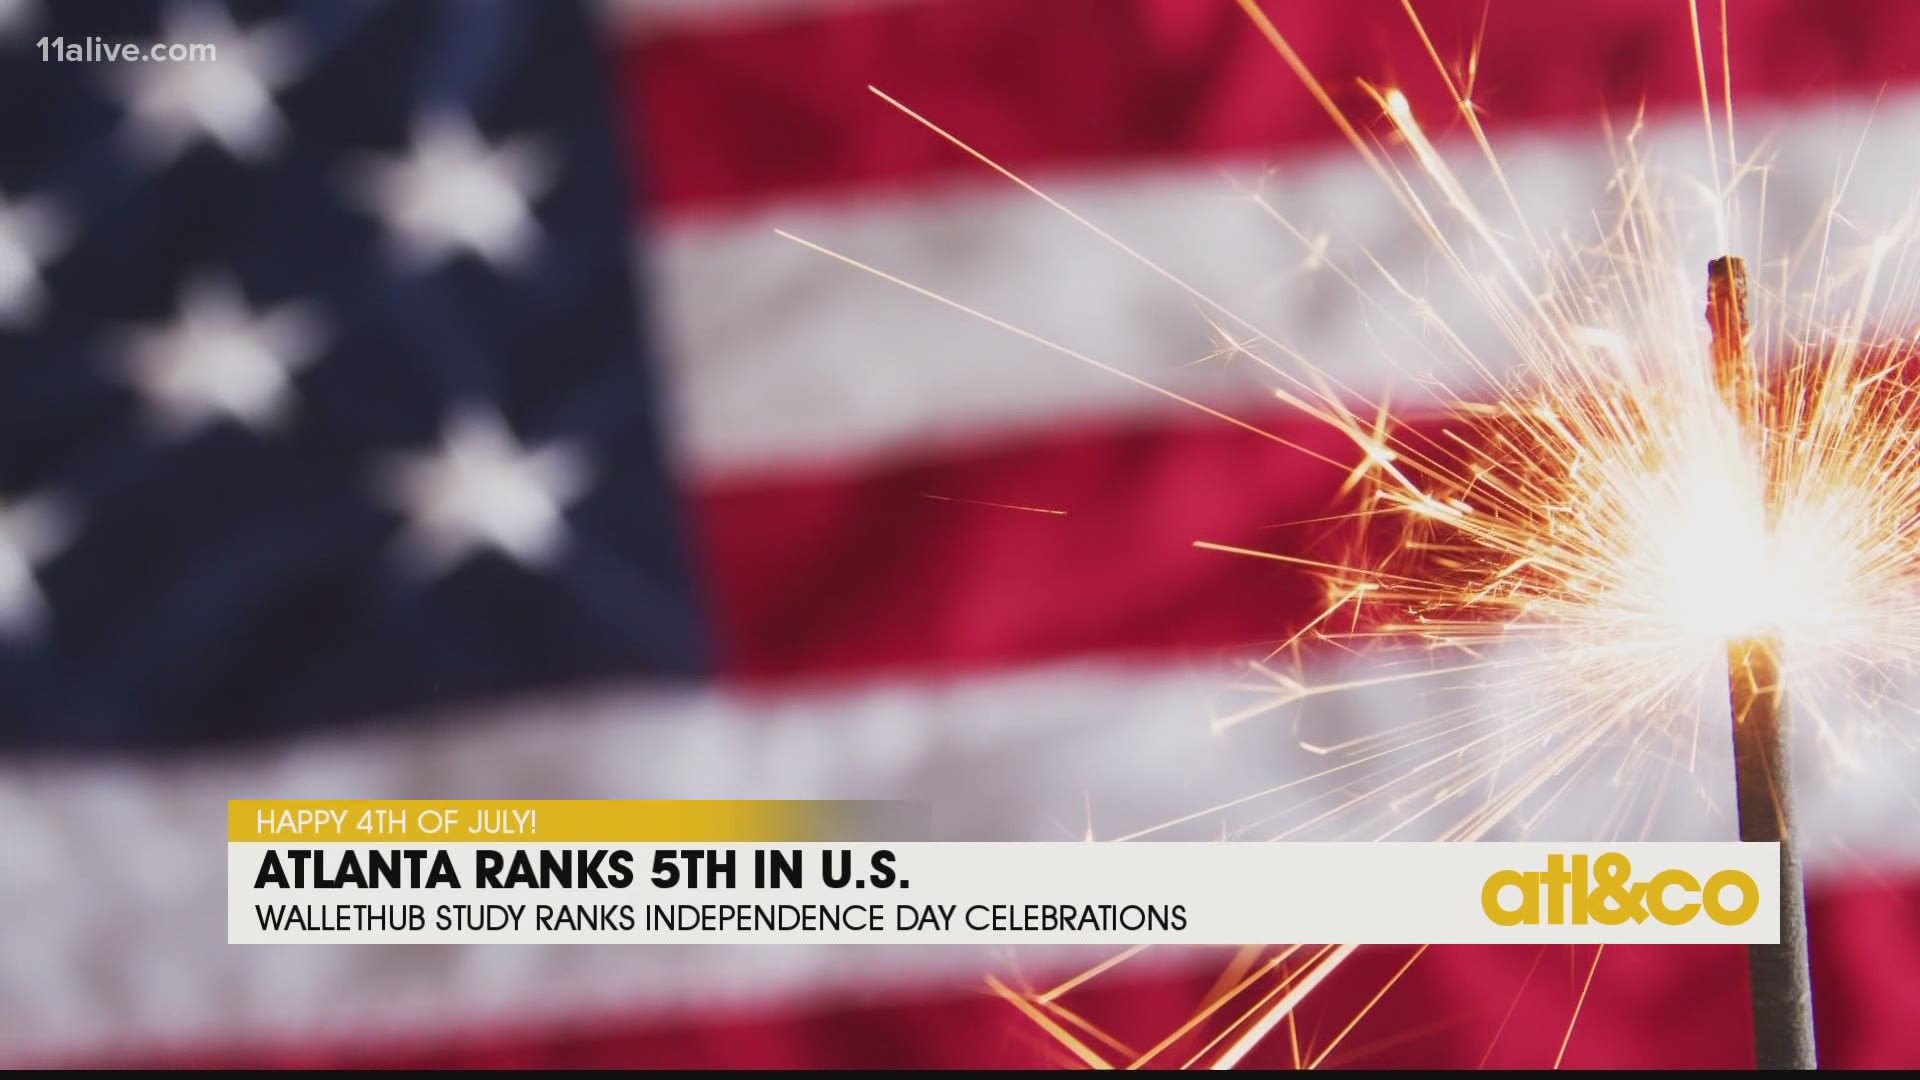 Atlanta ranks 5th in the U.S. for Independence Day celebrations. Tell us how you're celebrating this holiday weekend @ATLandCo.